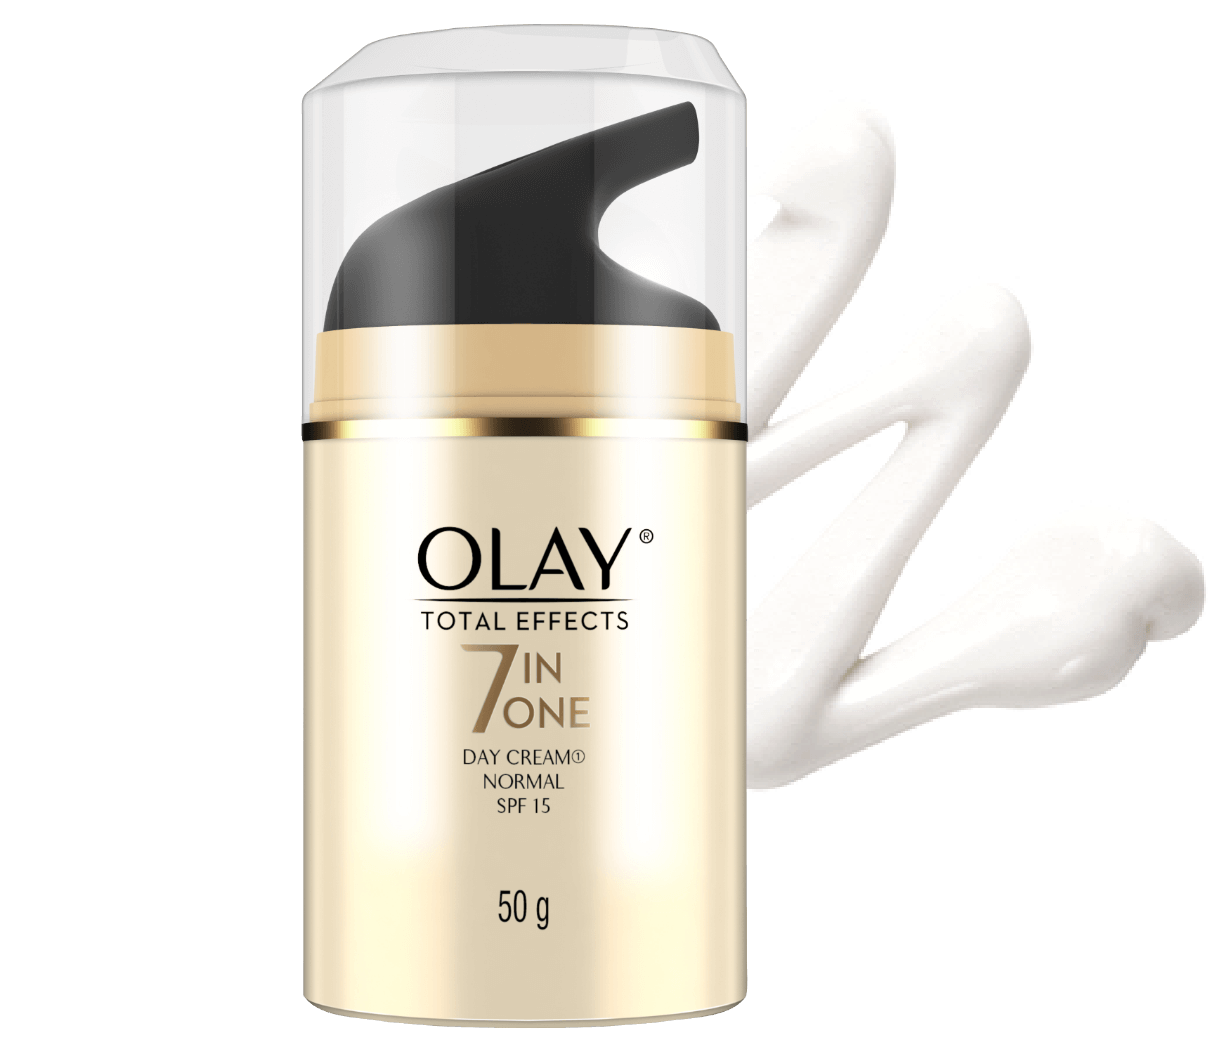 OLAY Total Effects Day Cream SPF 15